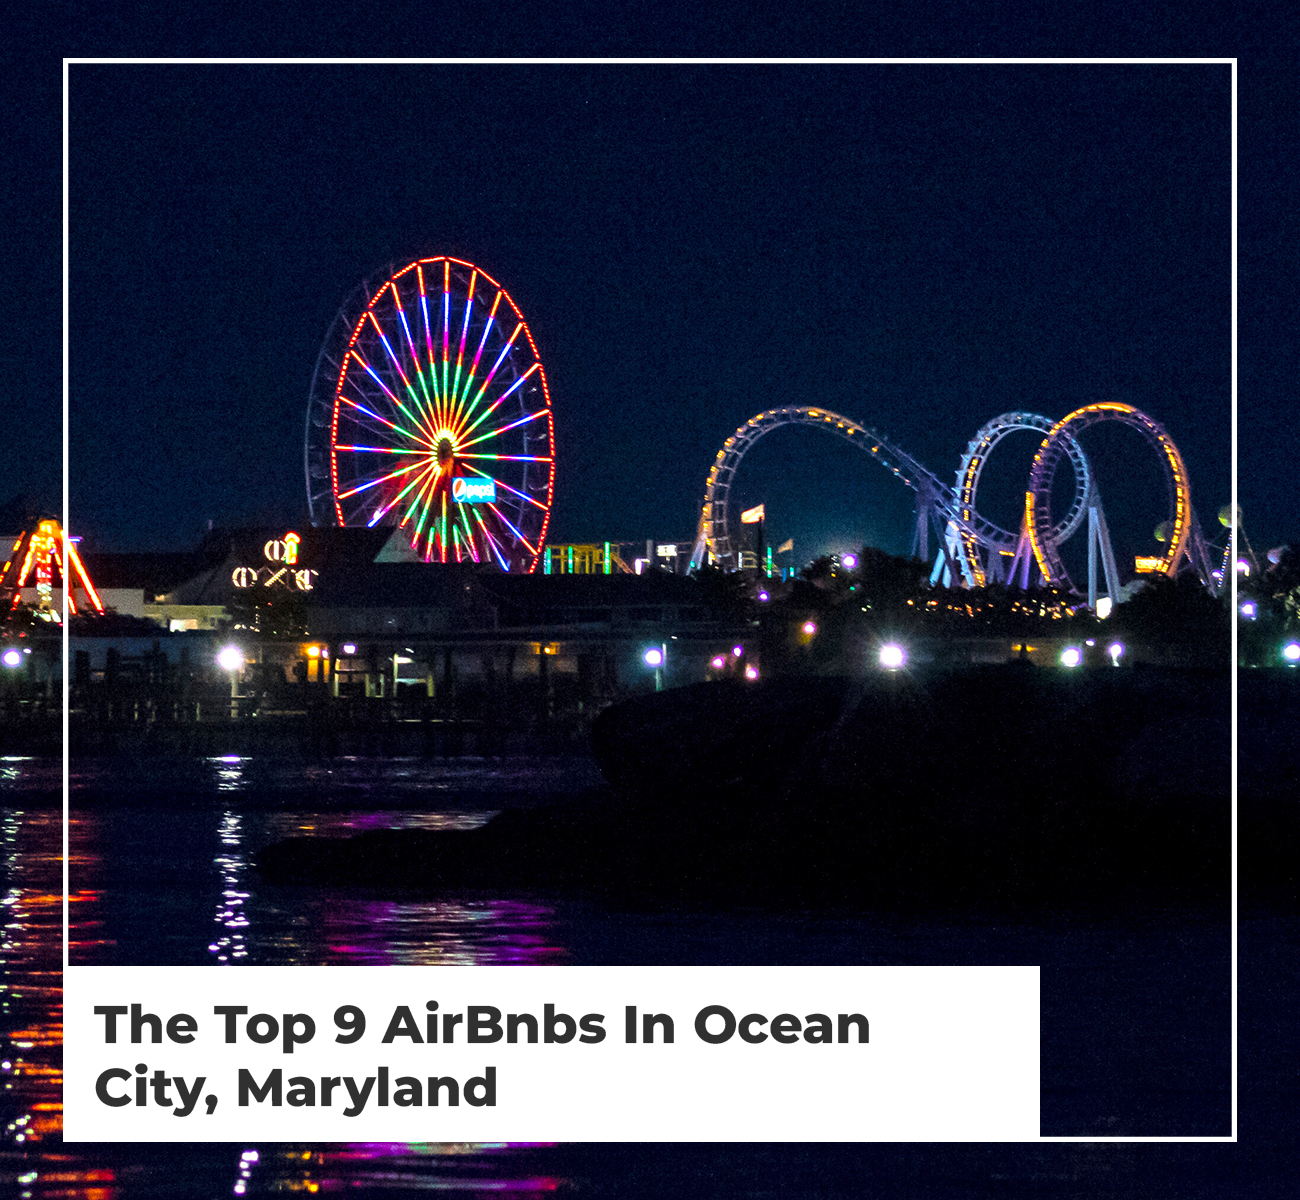 The Top 9 AirBnbs In Ocean City, Maryland - Main Image